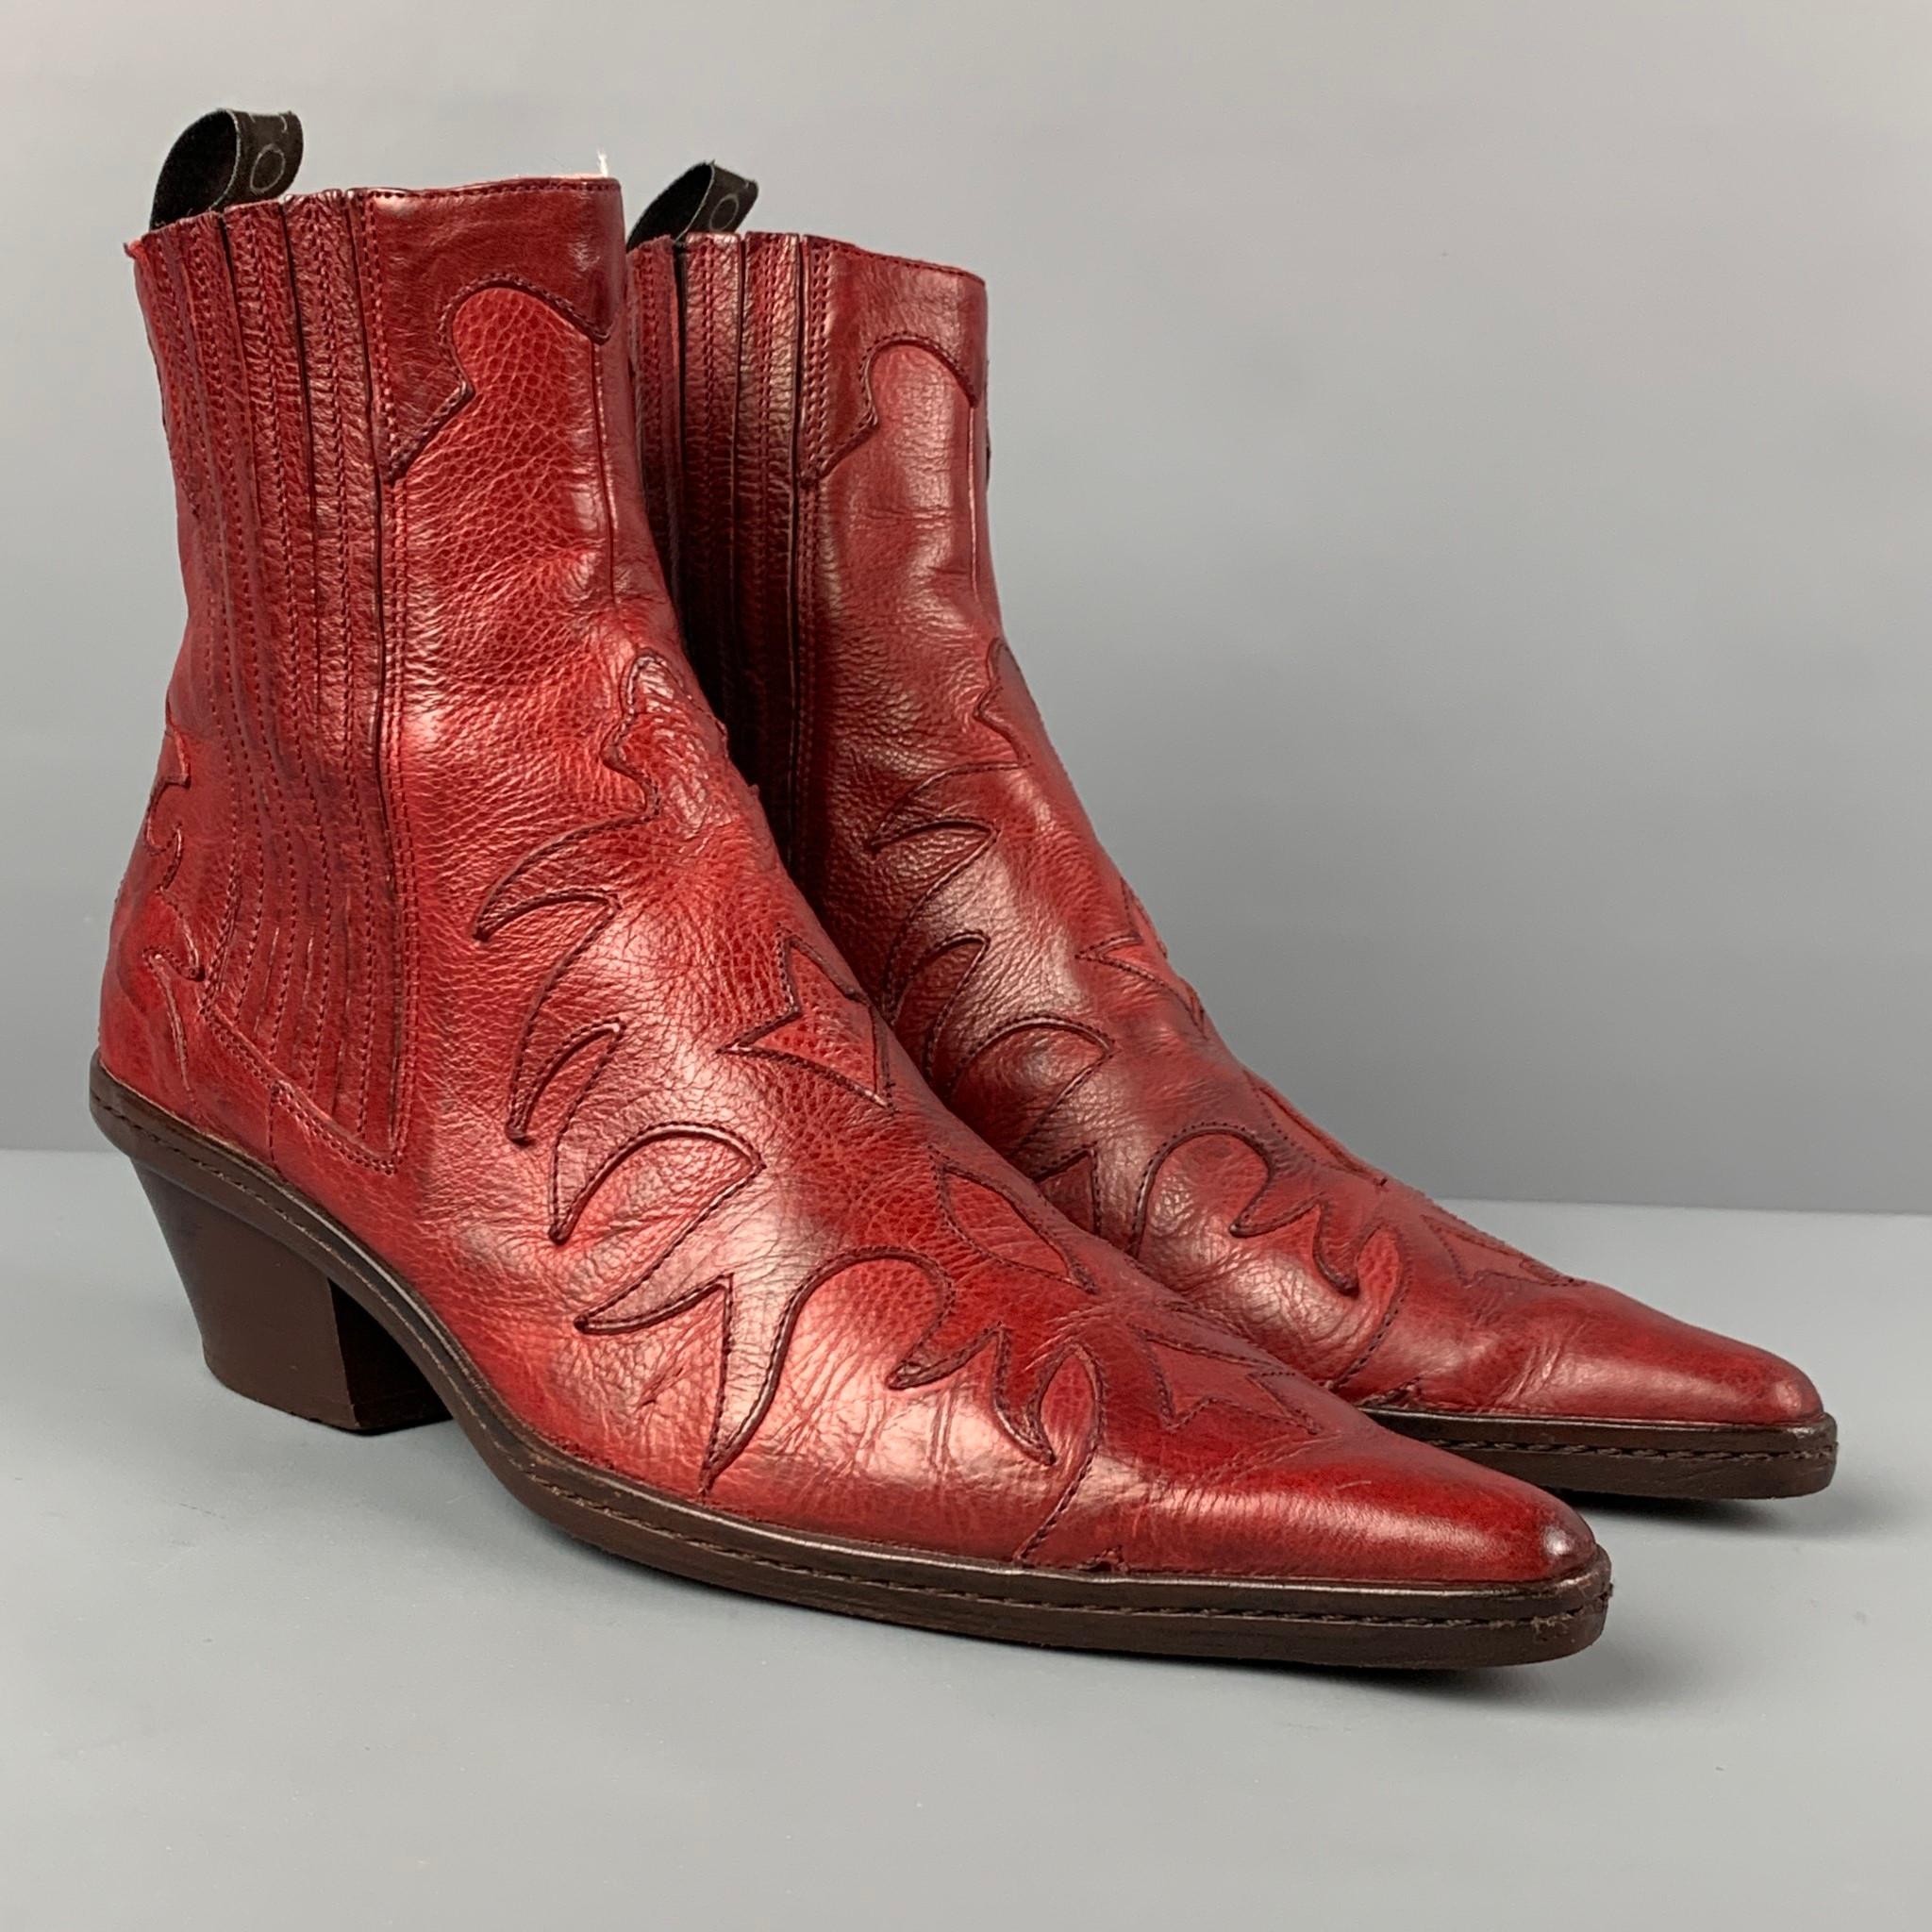 SARTORE boots comes in a red leather featuring a cowboy style, pointed toe, elastic detail, and a chunky heel. Made in Italy. 

Very Good Pre-Owned Condition.
Marked: 36
Original Retail Price: $596.00

Measurements:

Length: 9.5 in.
Width: 3.25